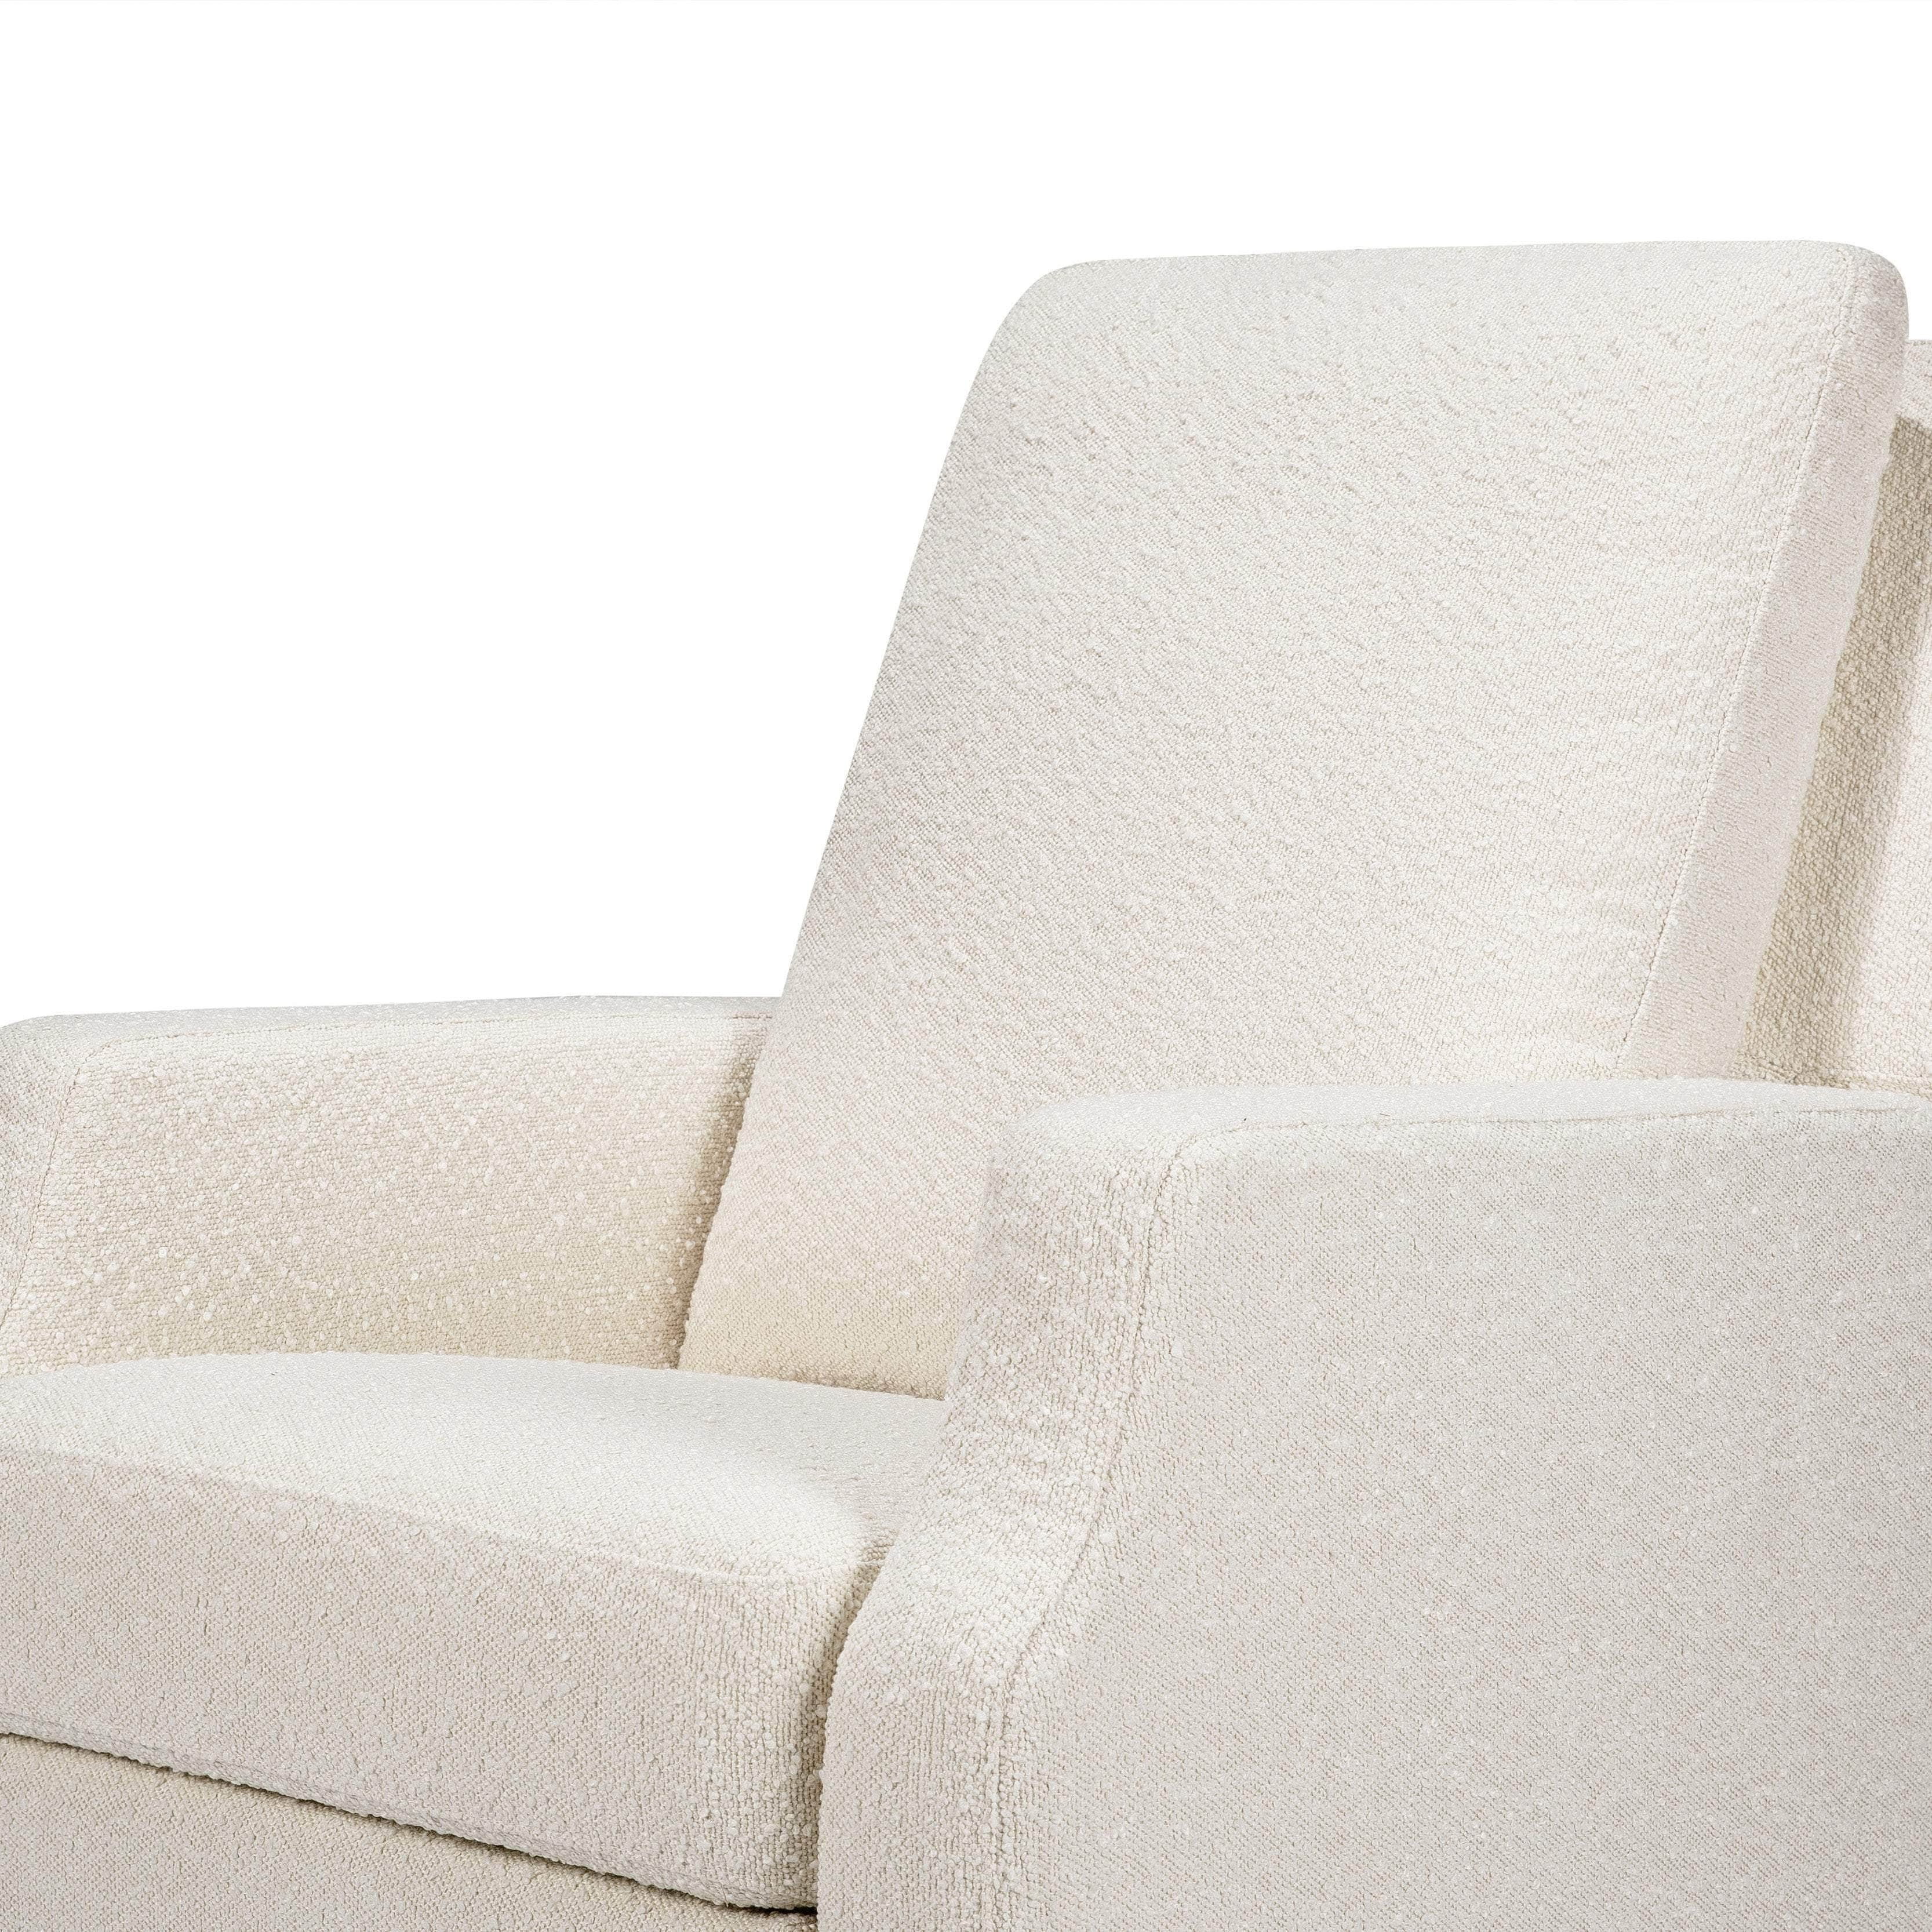 Crewe Recliner and Swivel Glider | in Boucle